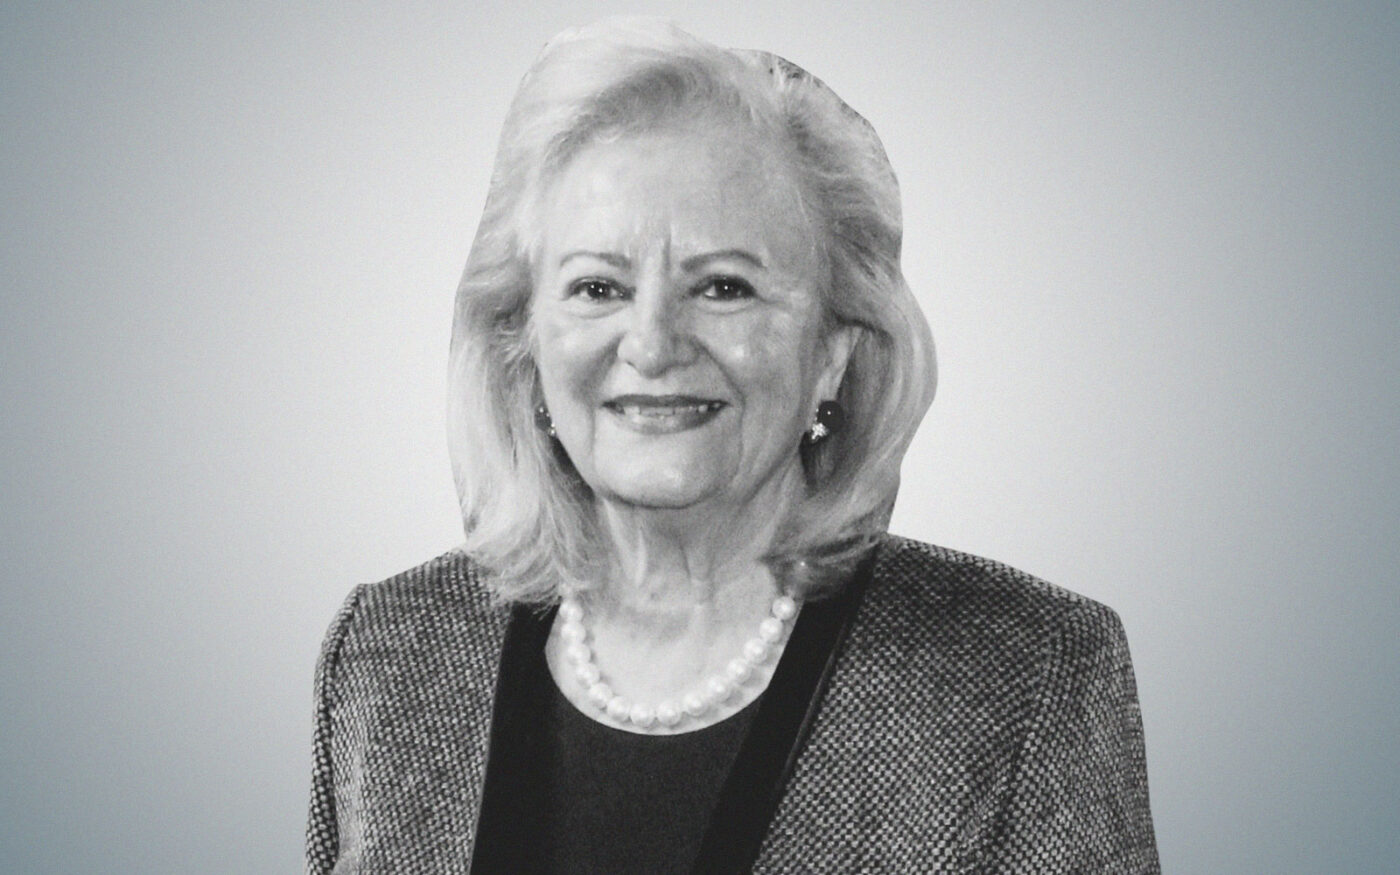 Dallas Residential Real Estate Firm Founder Virginia Cook has Died